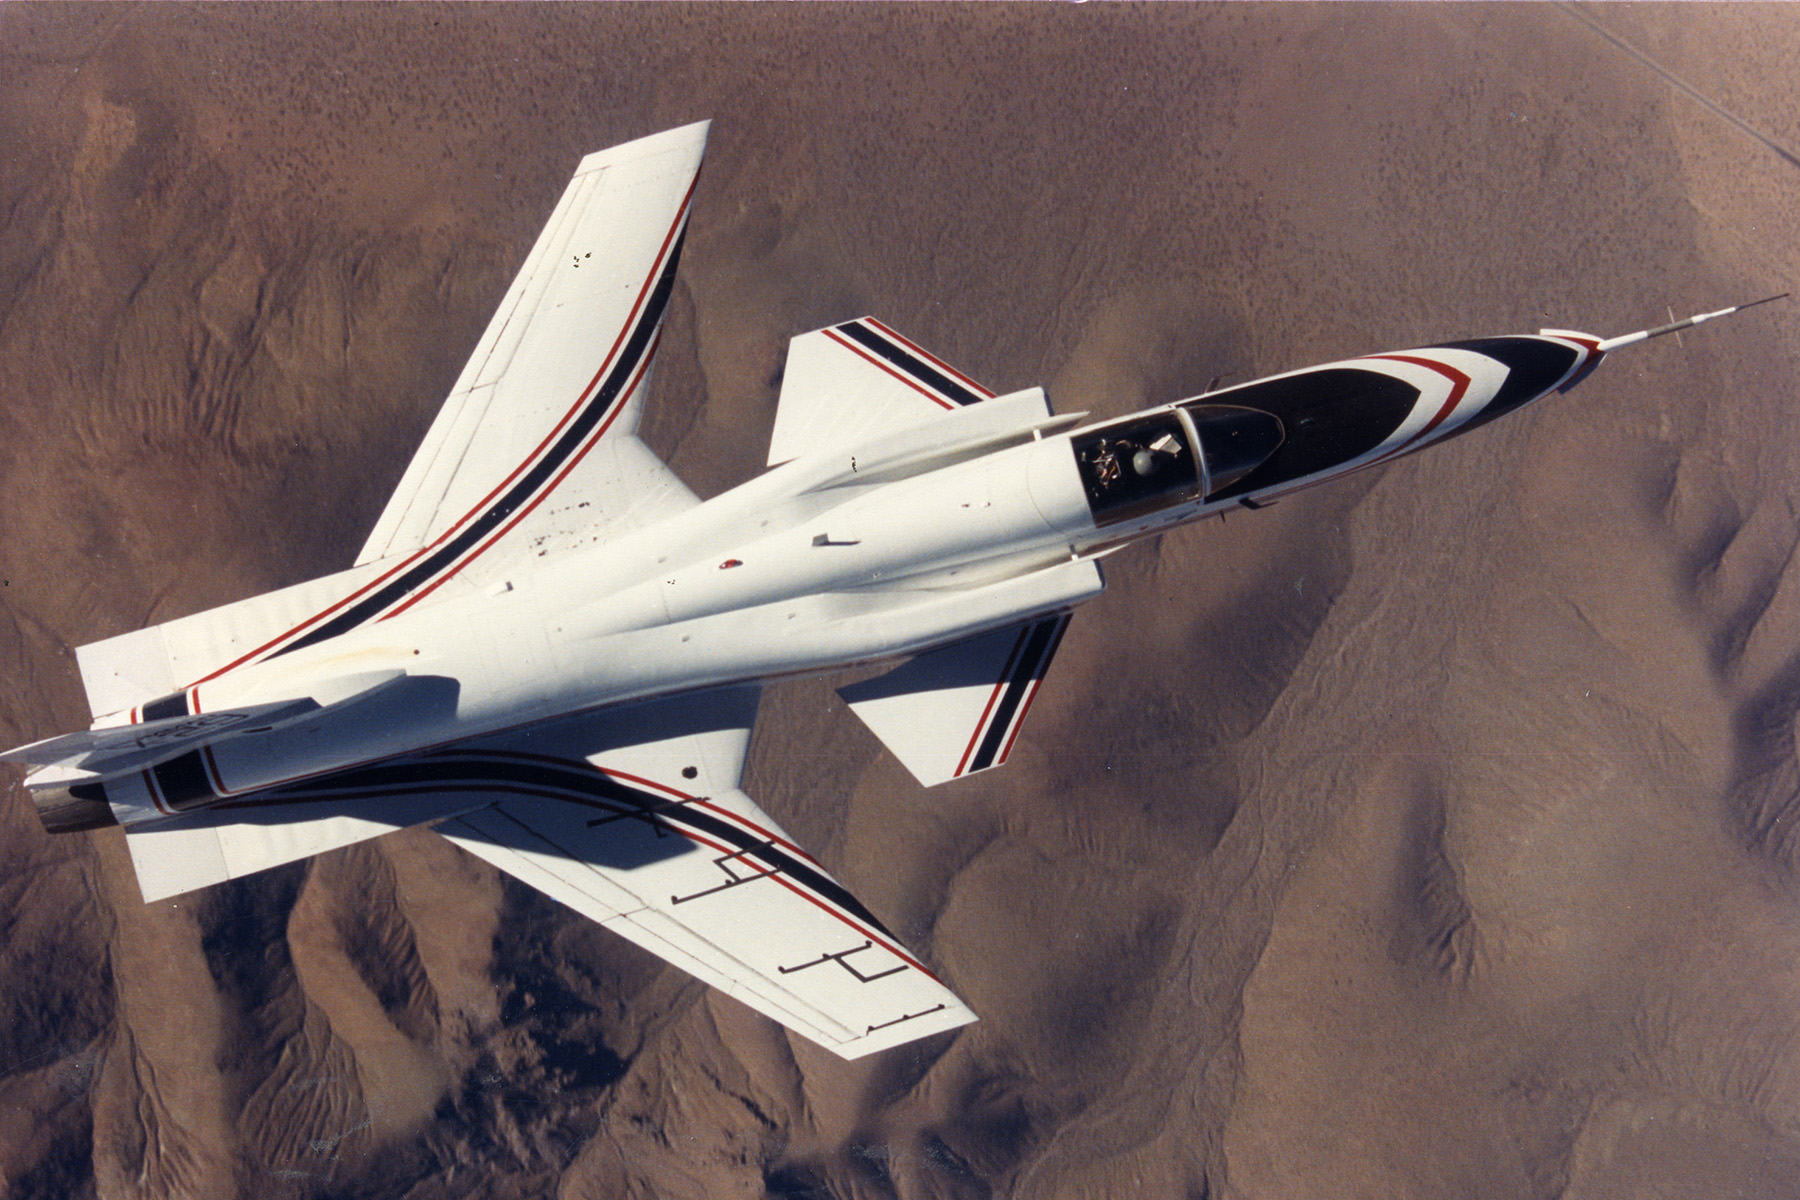 Grumman X-29: The impossible fighter jet with inverted wings - CNN Style